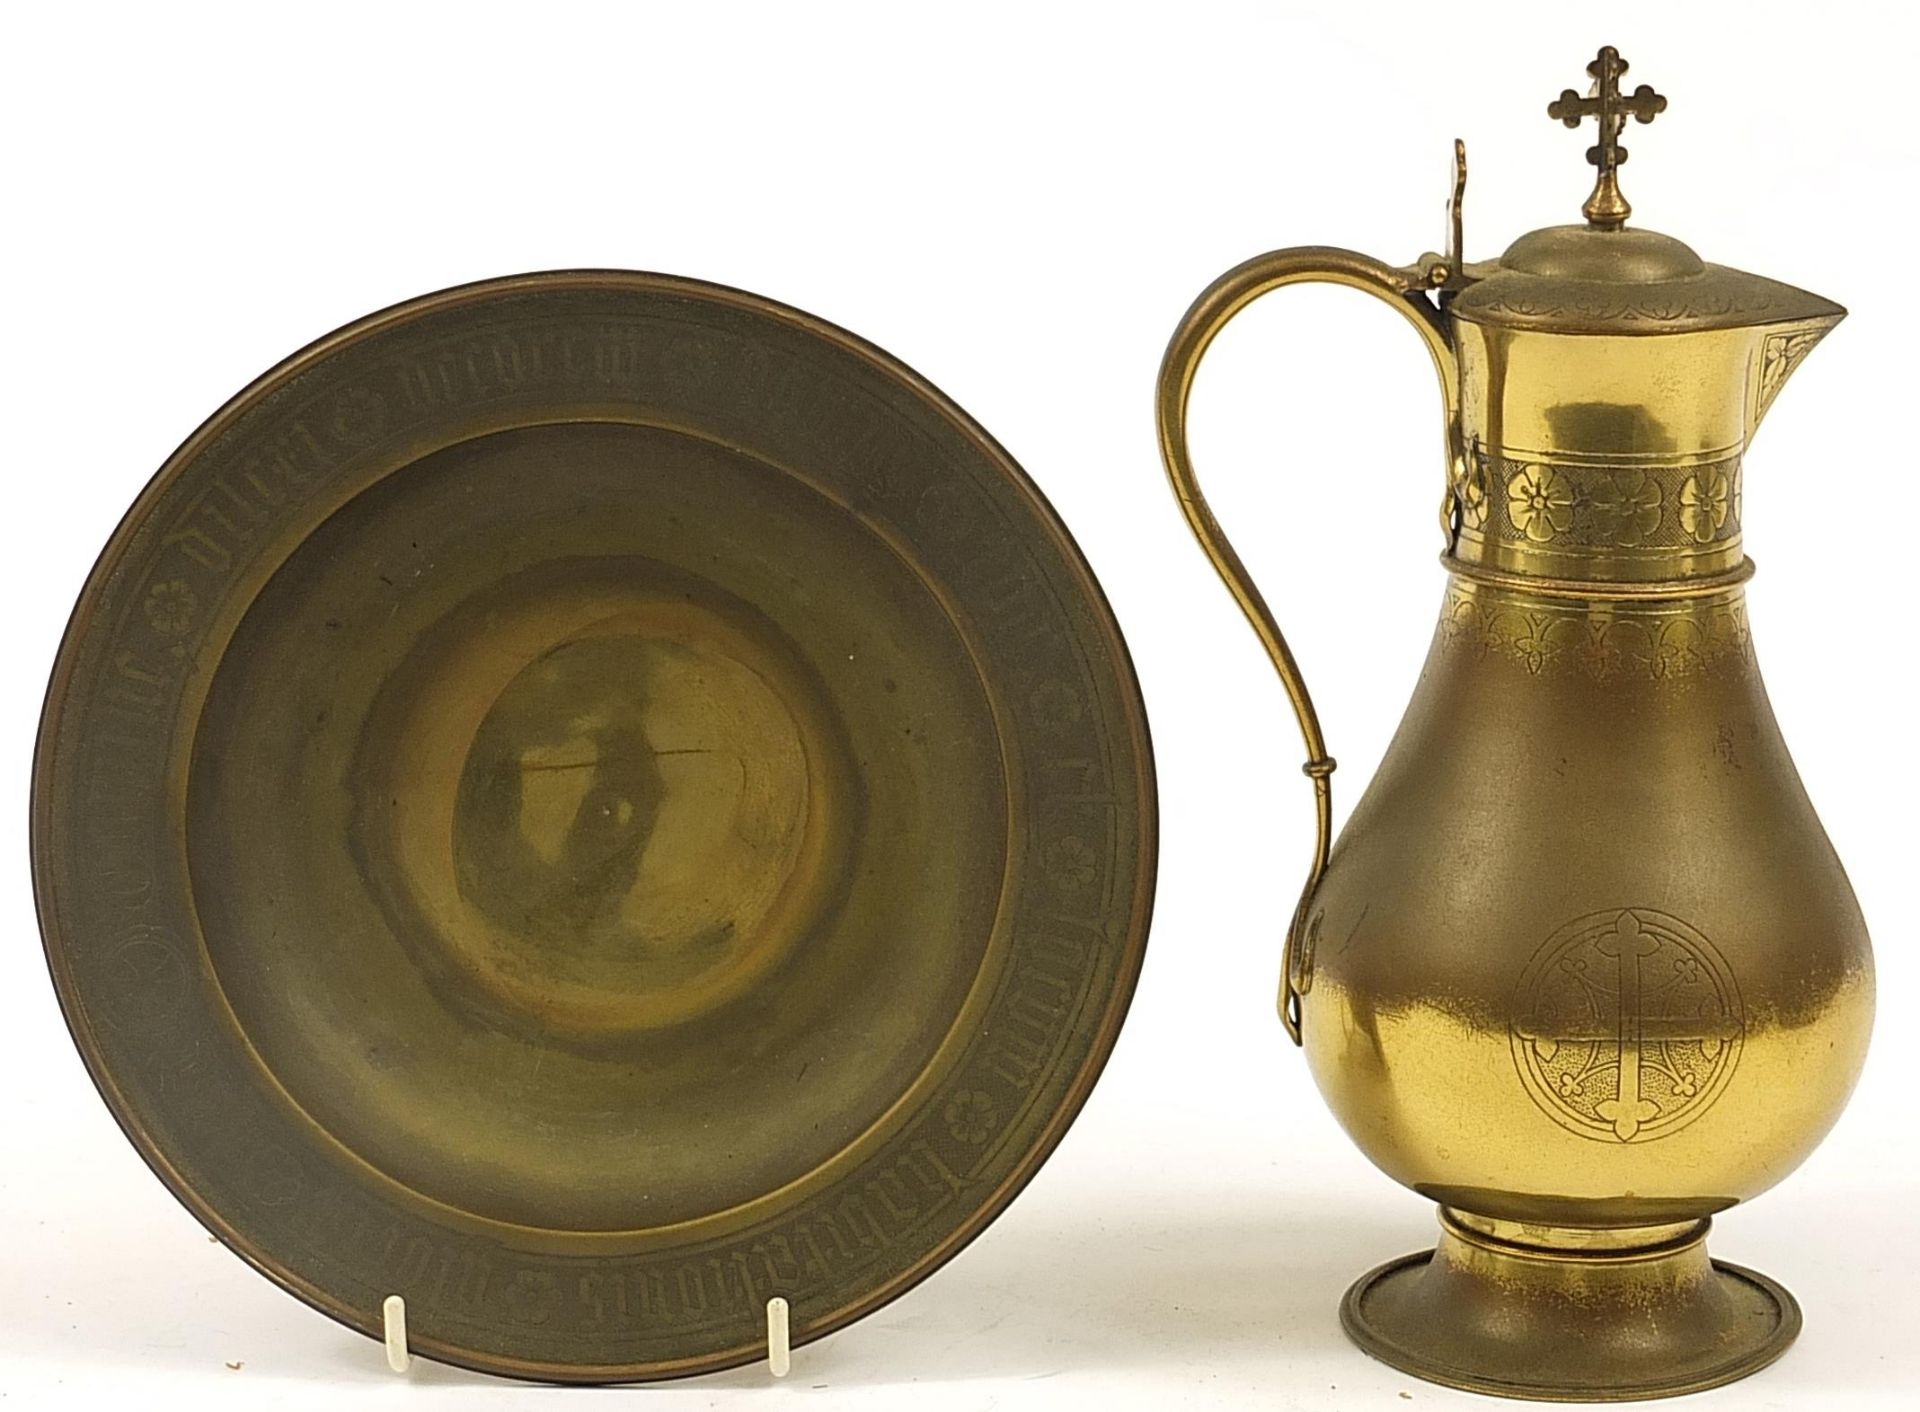 Antique gilt copper communion wine ewer and presentation plate engraved Presented to The Lady Abbess